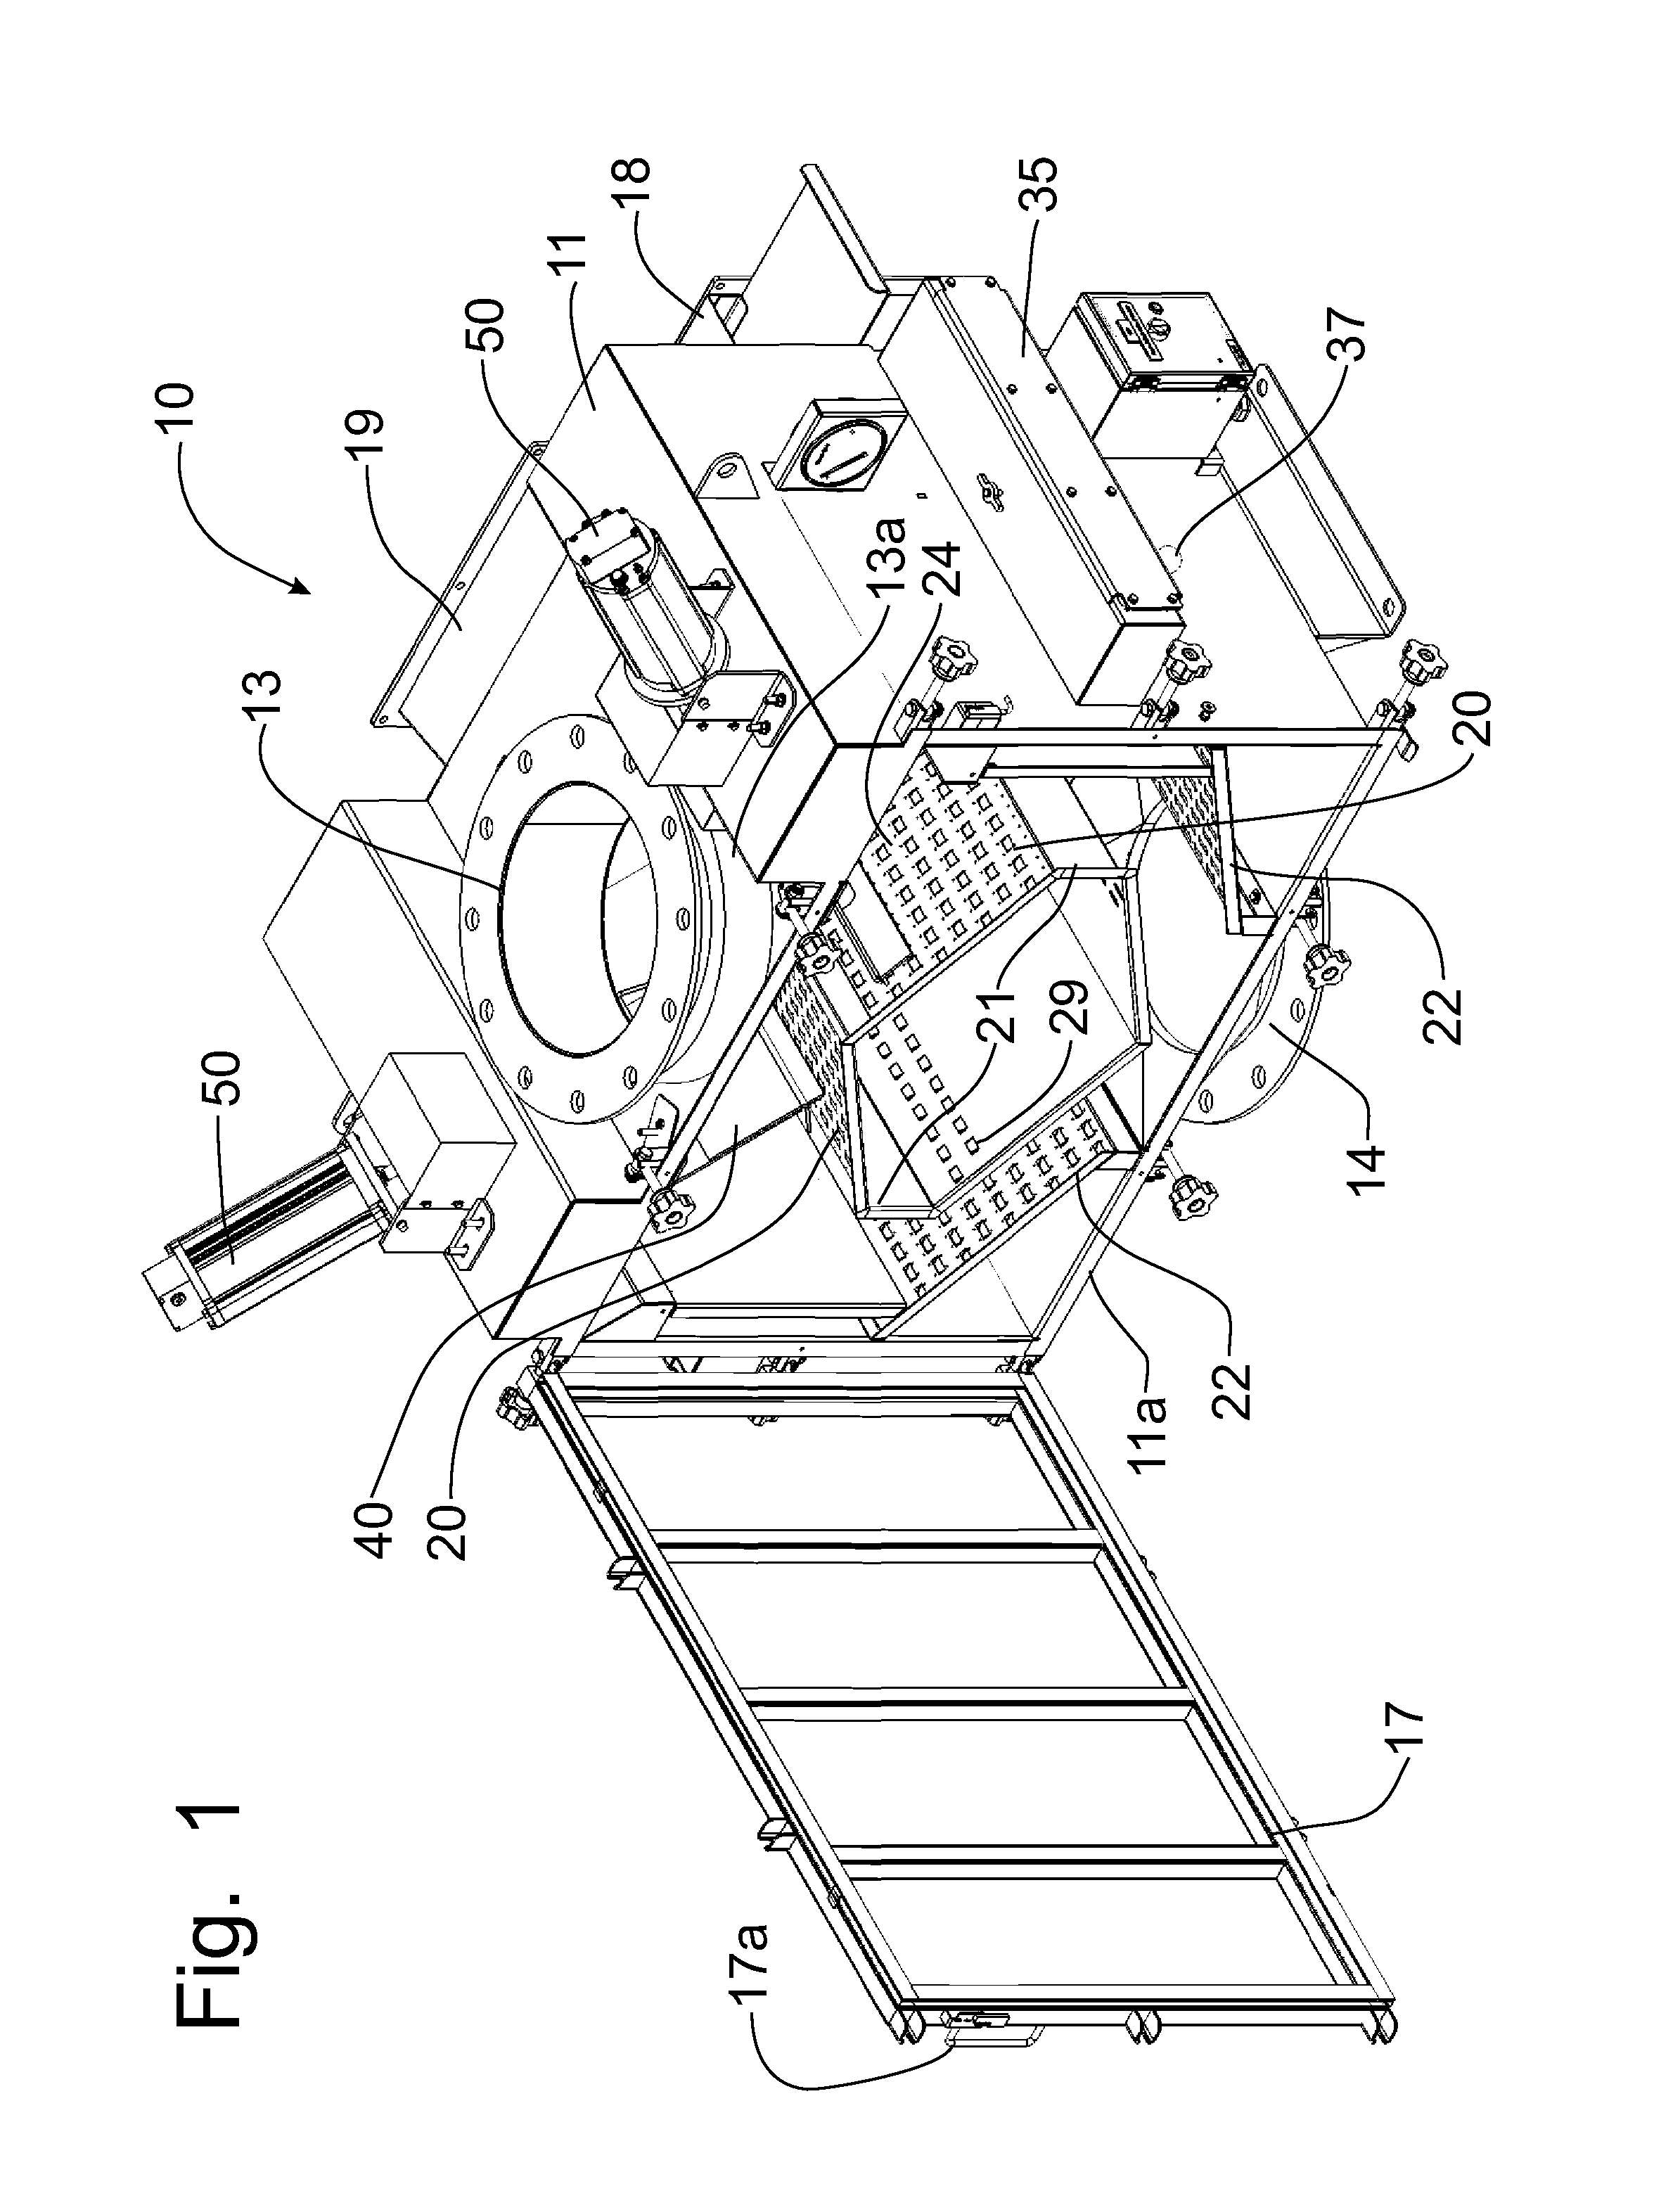 Dedusting Apparatus Having Actuator Controlled Inlet Deflectors to Provide Adjustable Product Flow Regulation